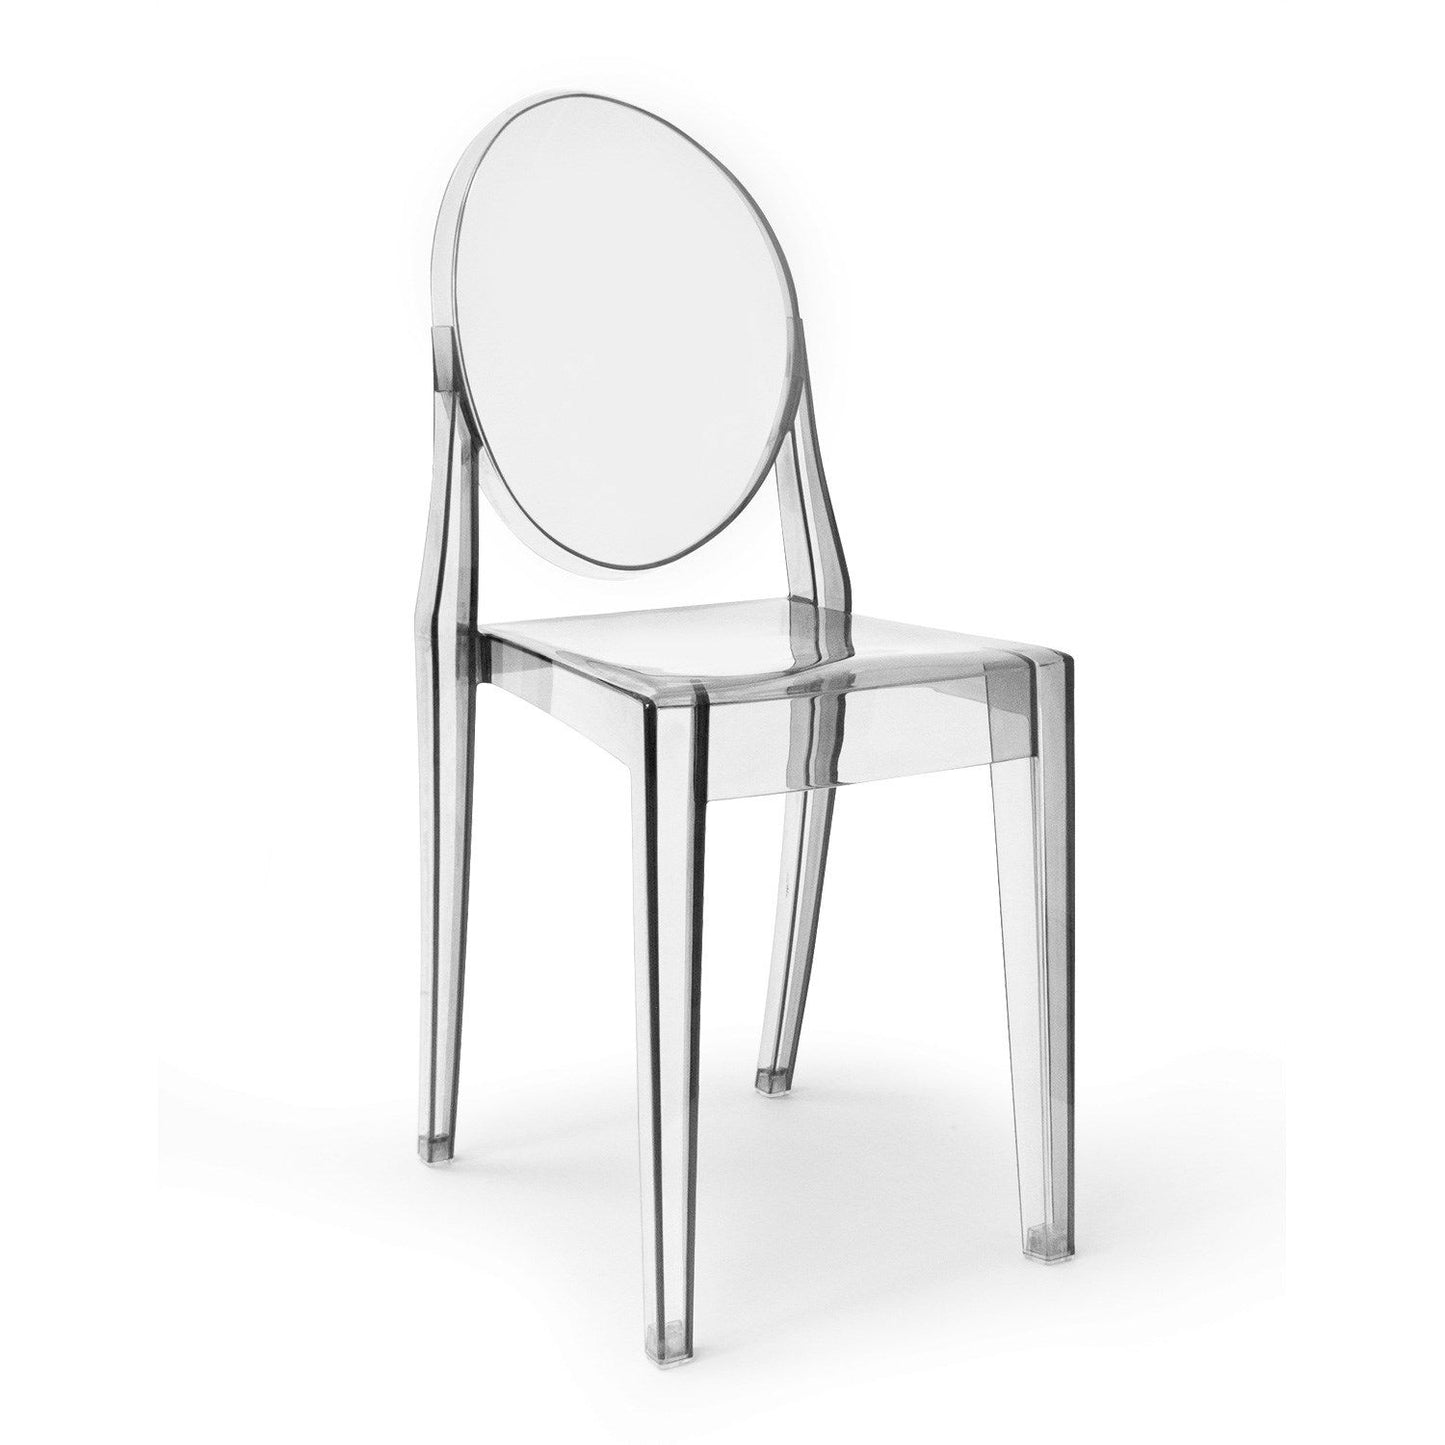 Aeon Furniture Specter Side Chair - Set Of 2